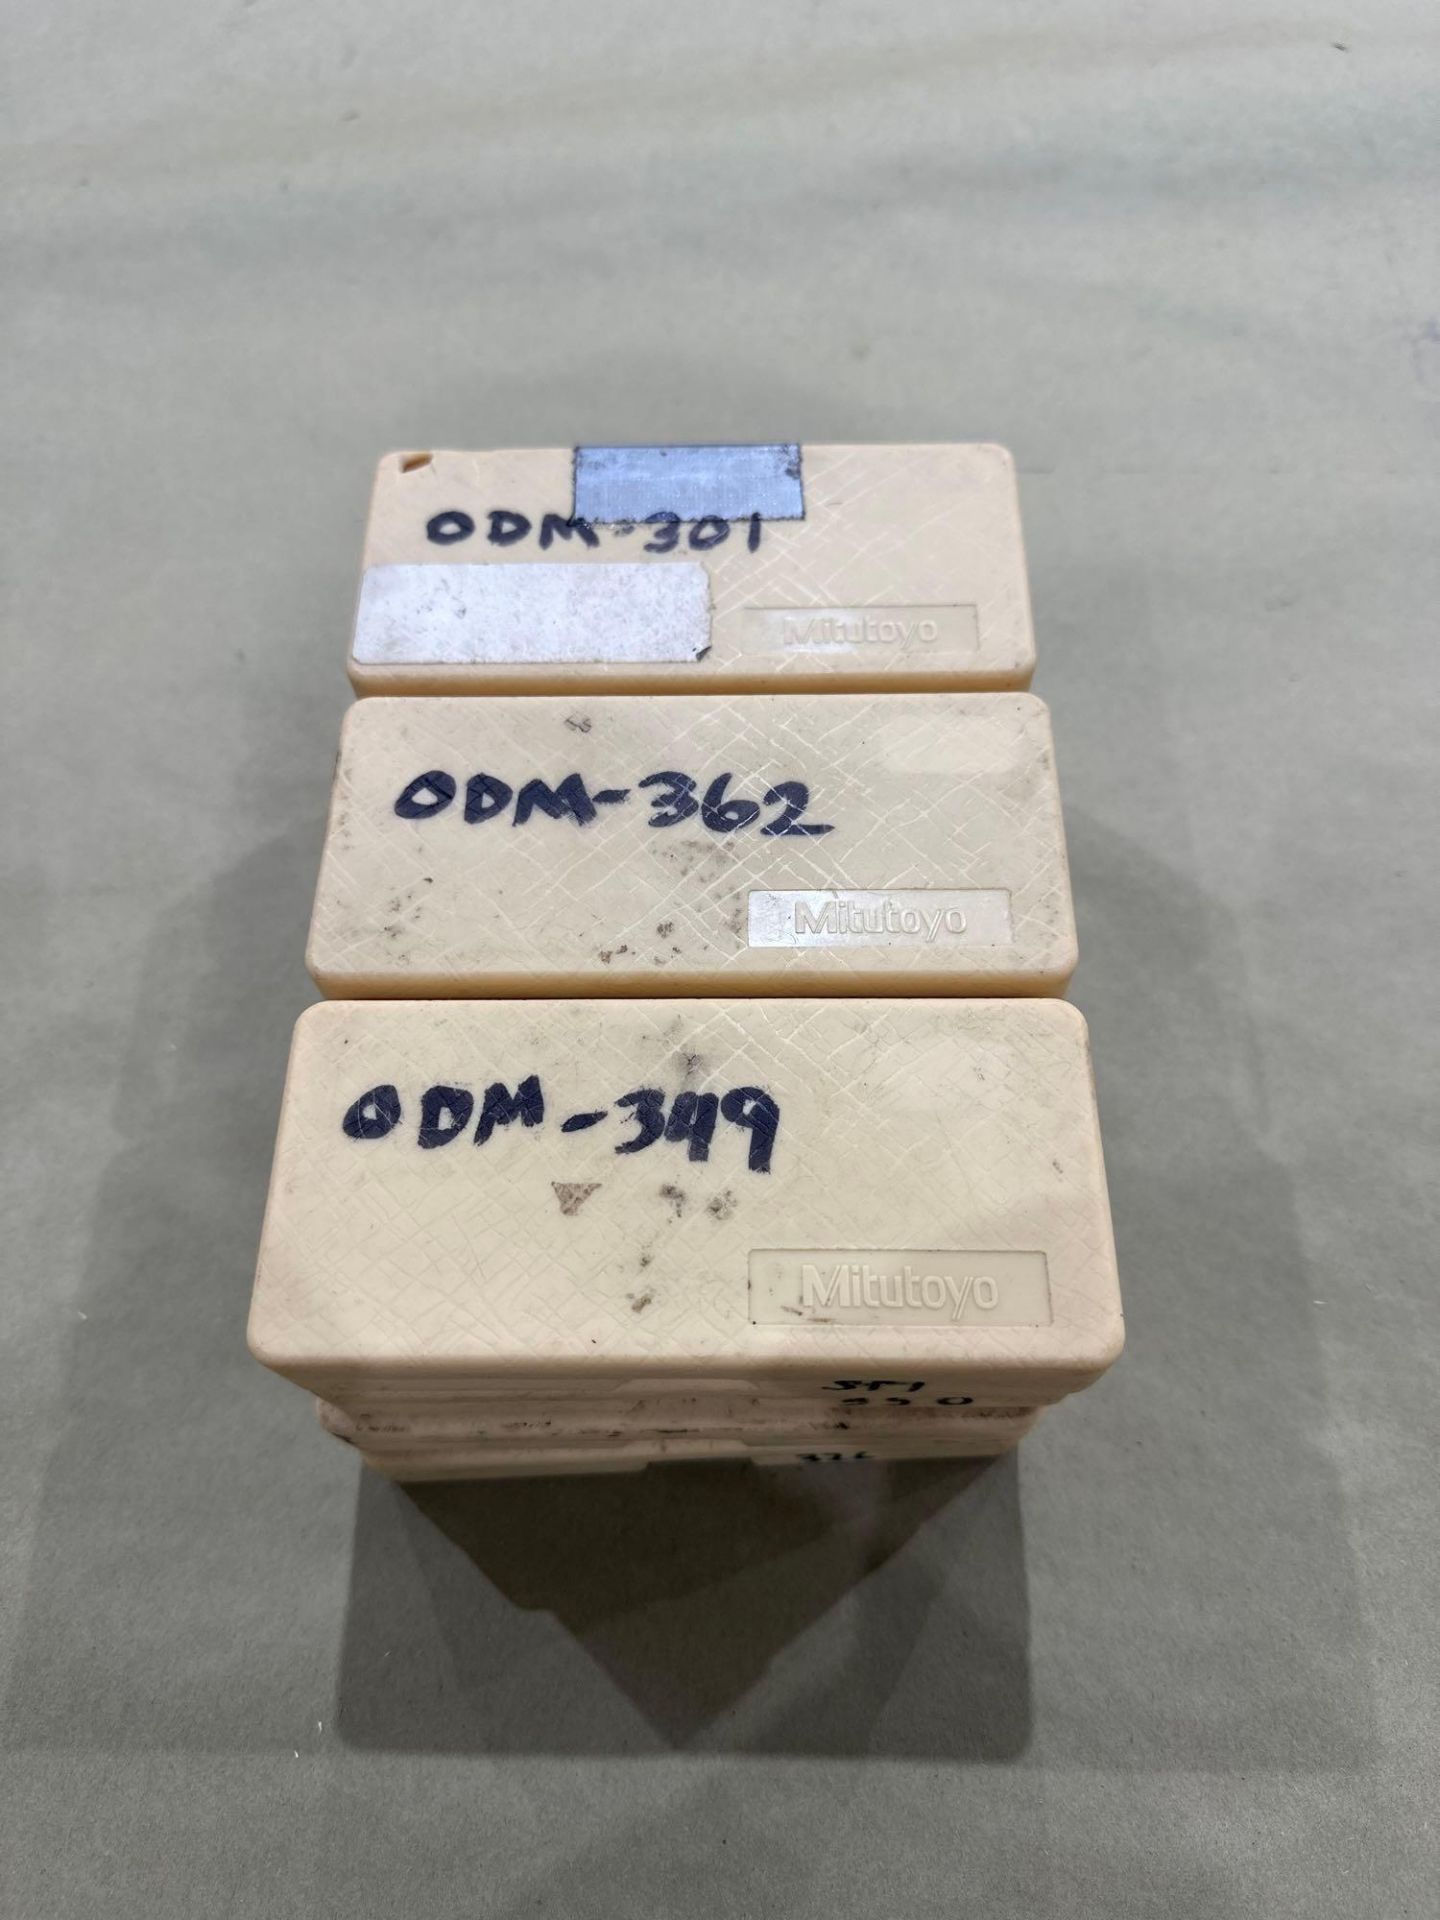 Lot of 12: Mitutoyo Mechanical OD Micrometer M110-1”, 0-1” Range, .001” Graduation, in plastic boxes - Image 2 of 7